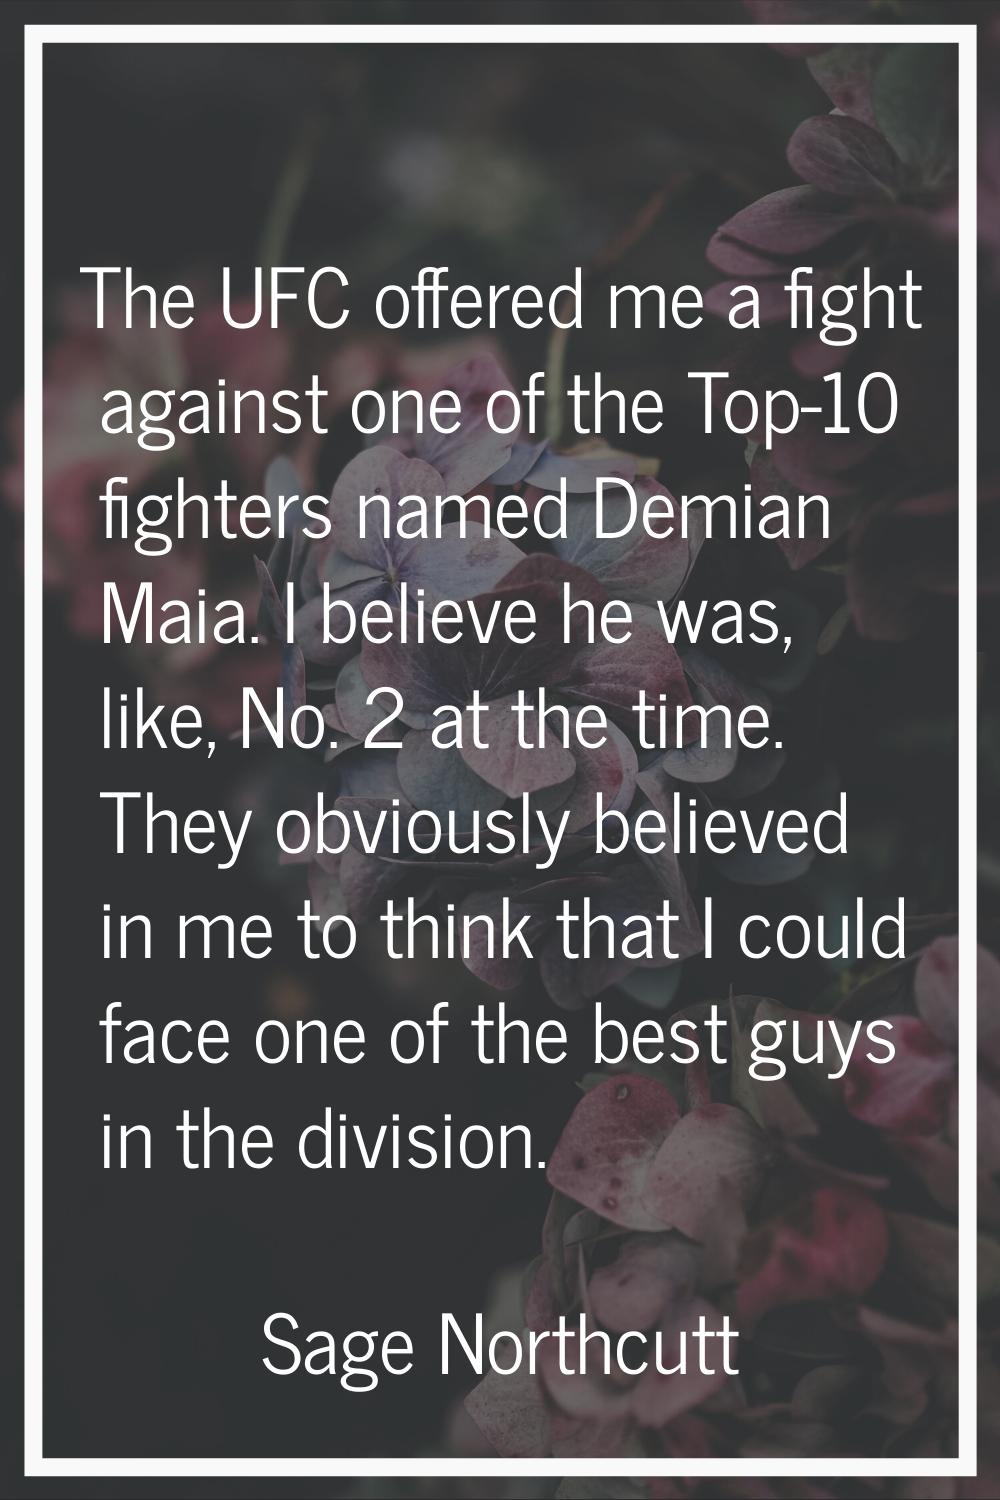 The UFC offered me a fight against one of the Top-10 fighters named Demian Maia. I believe he was, 